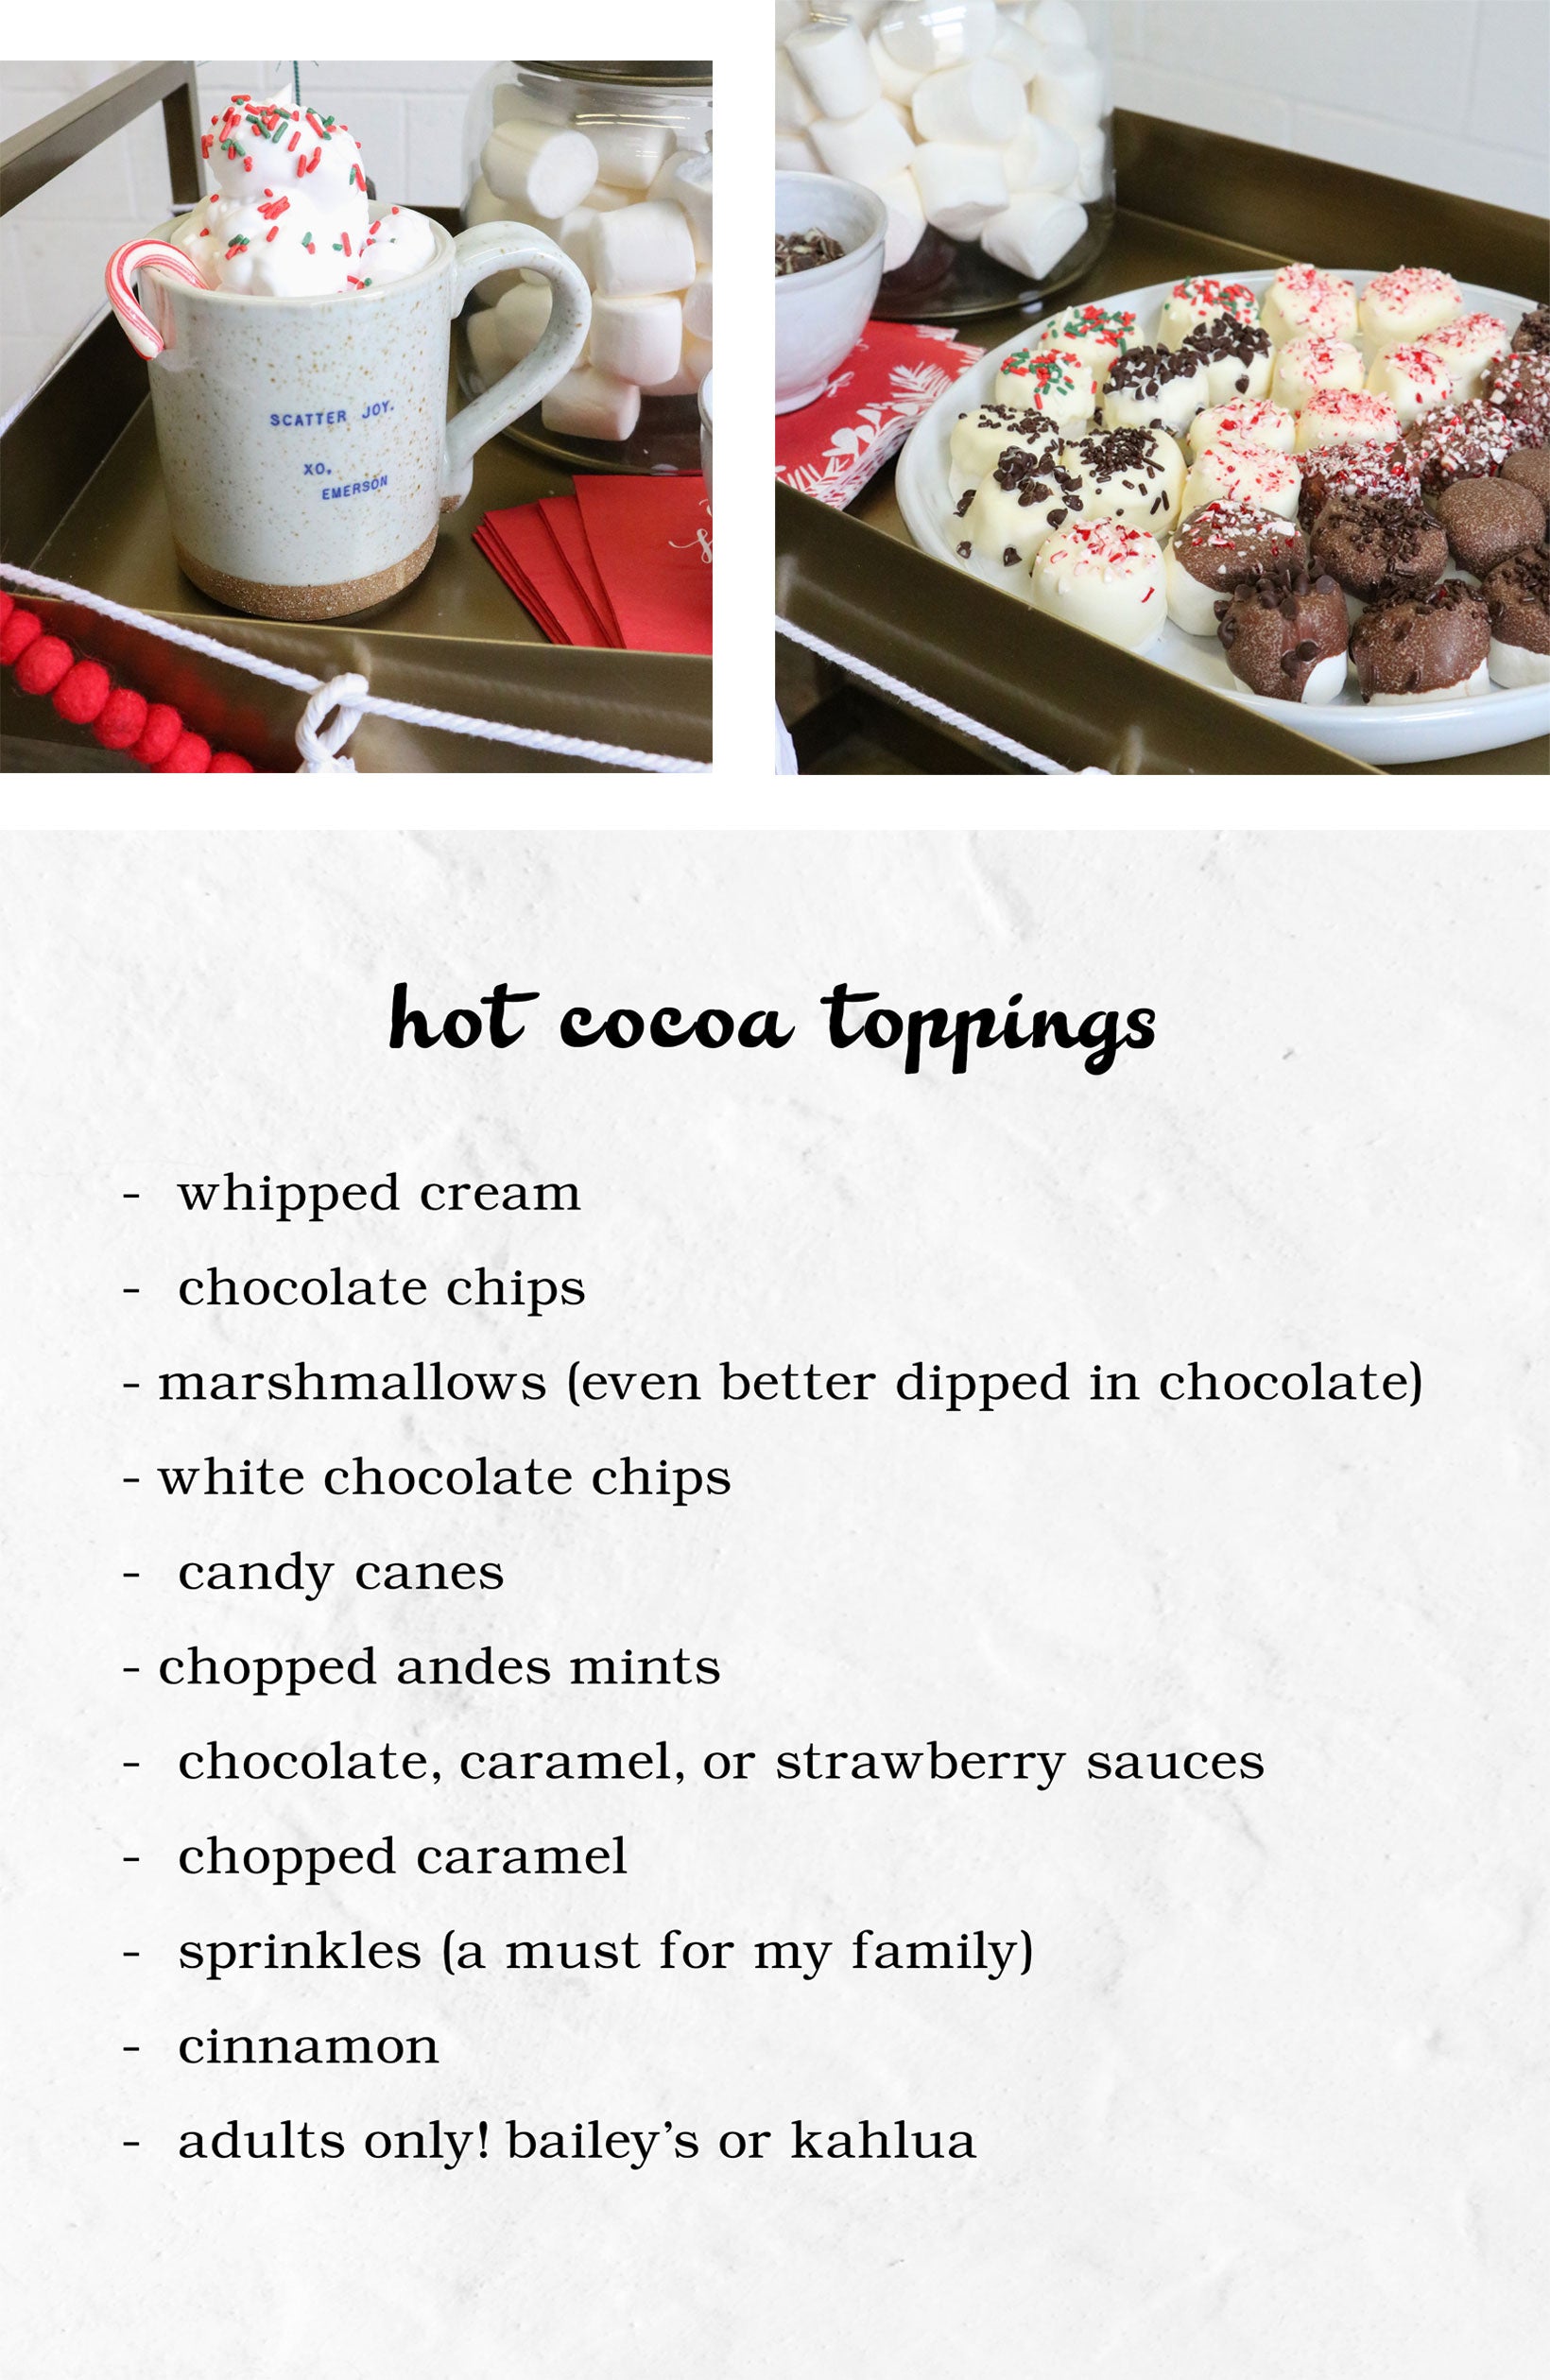 Hot Cocoa Topping Ideas